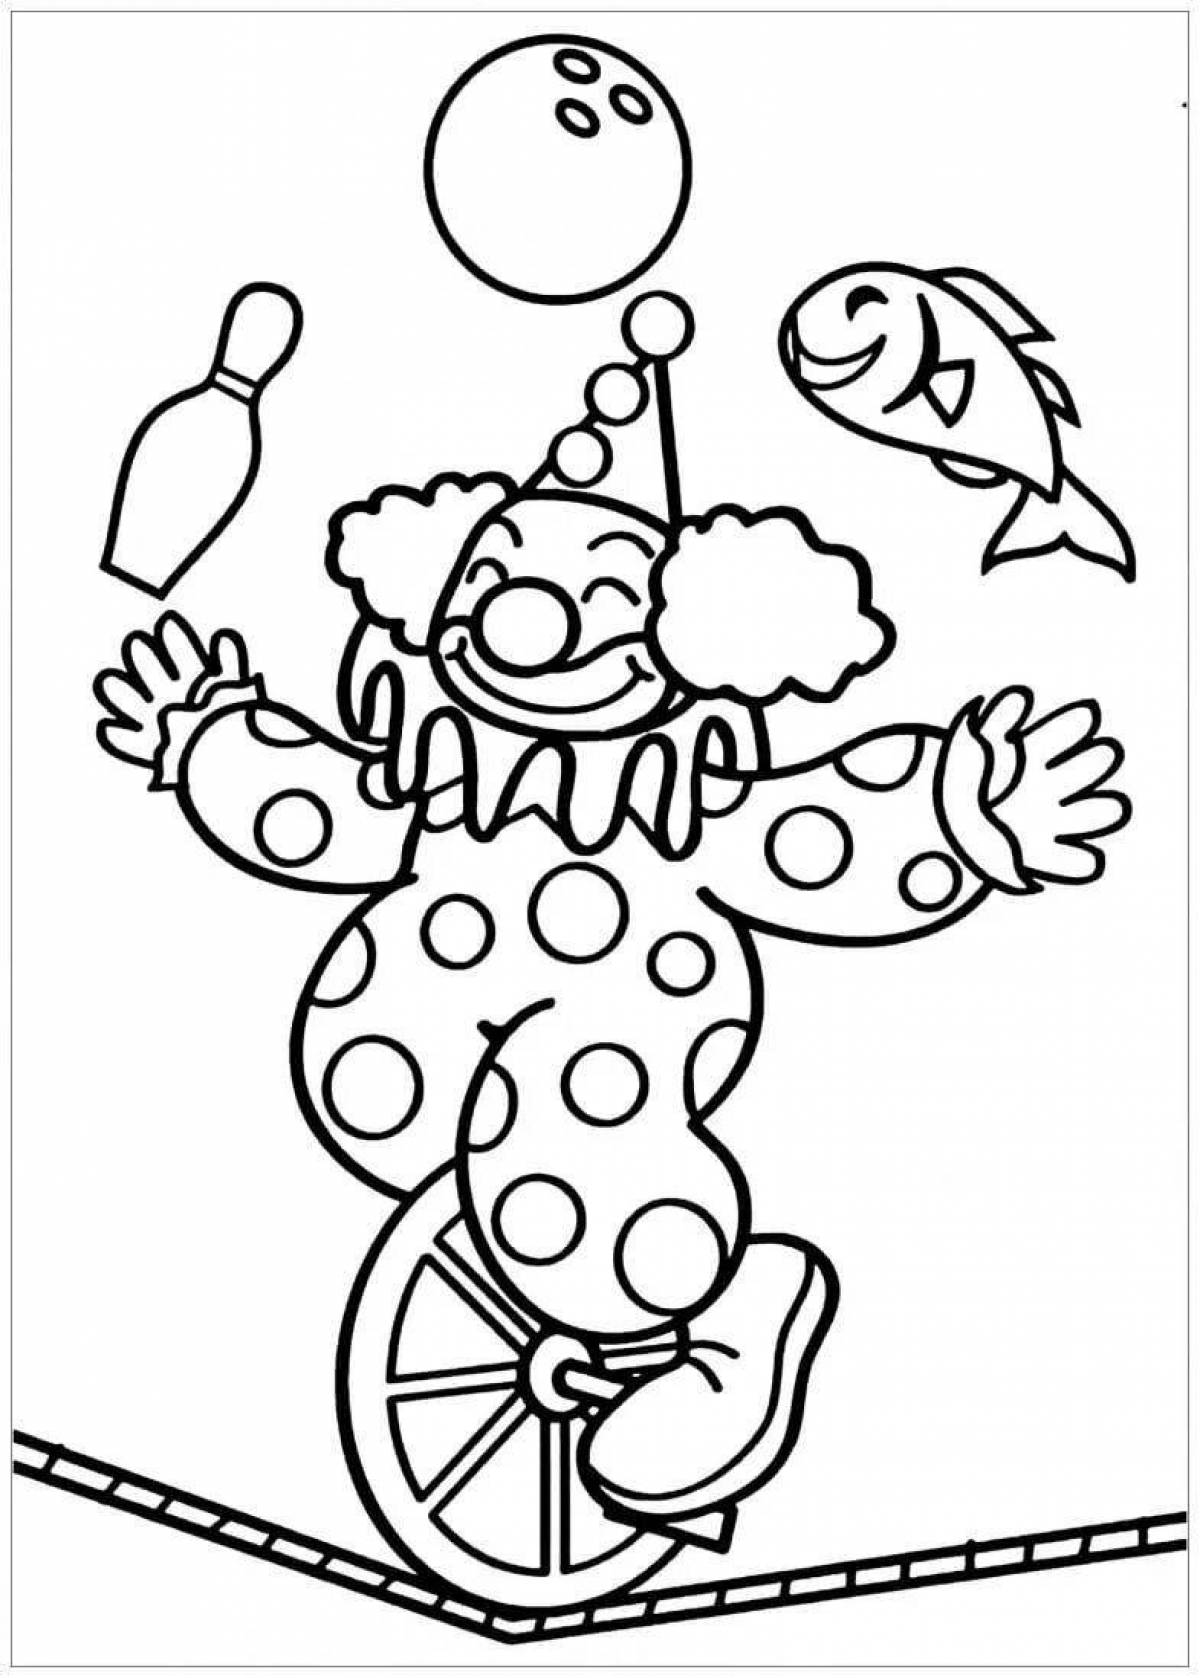 Amusing clown coloring book for 6-7 year olds